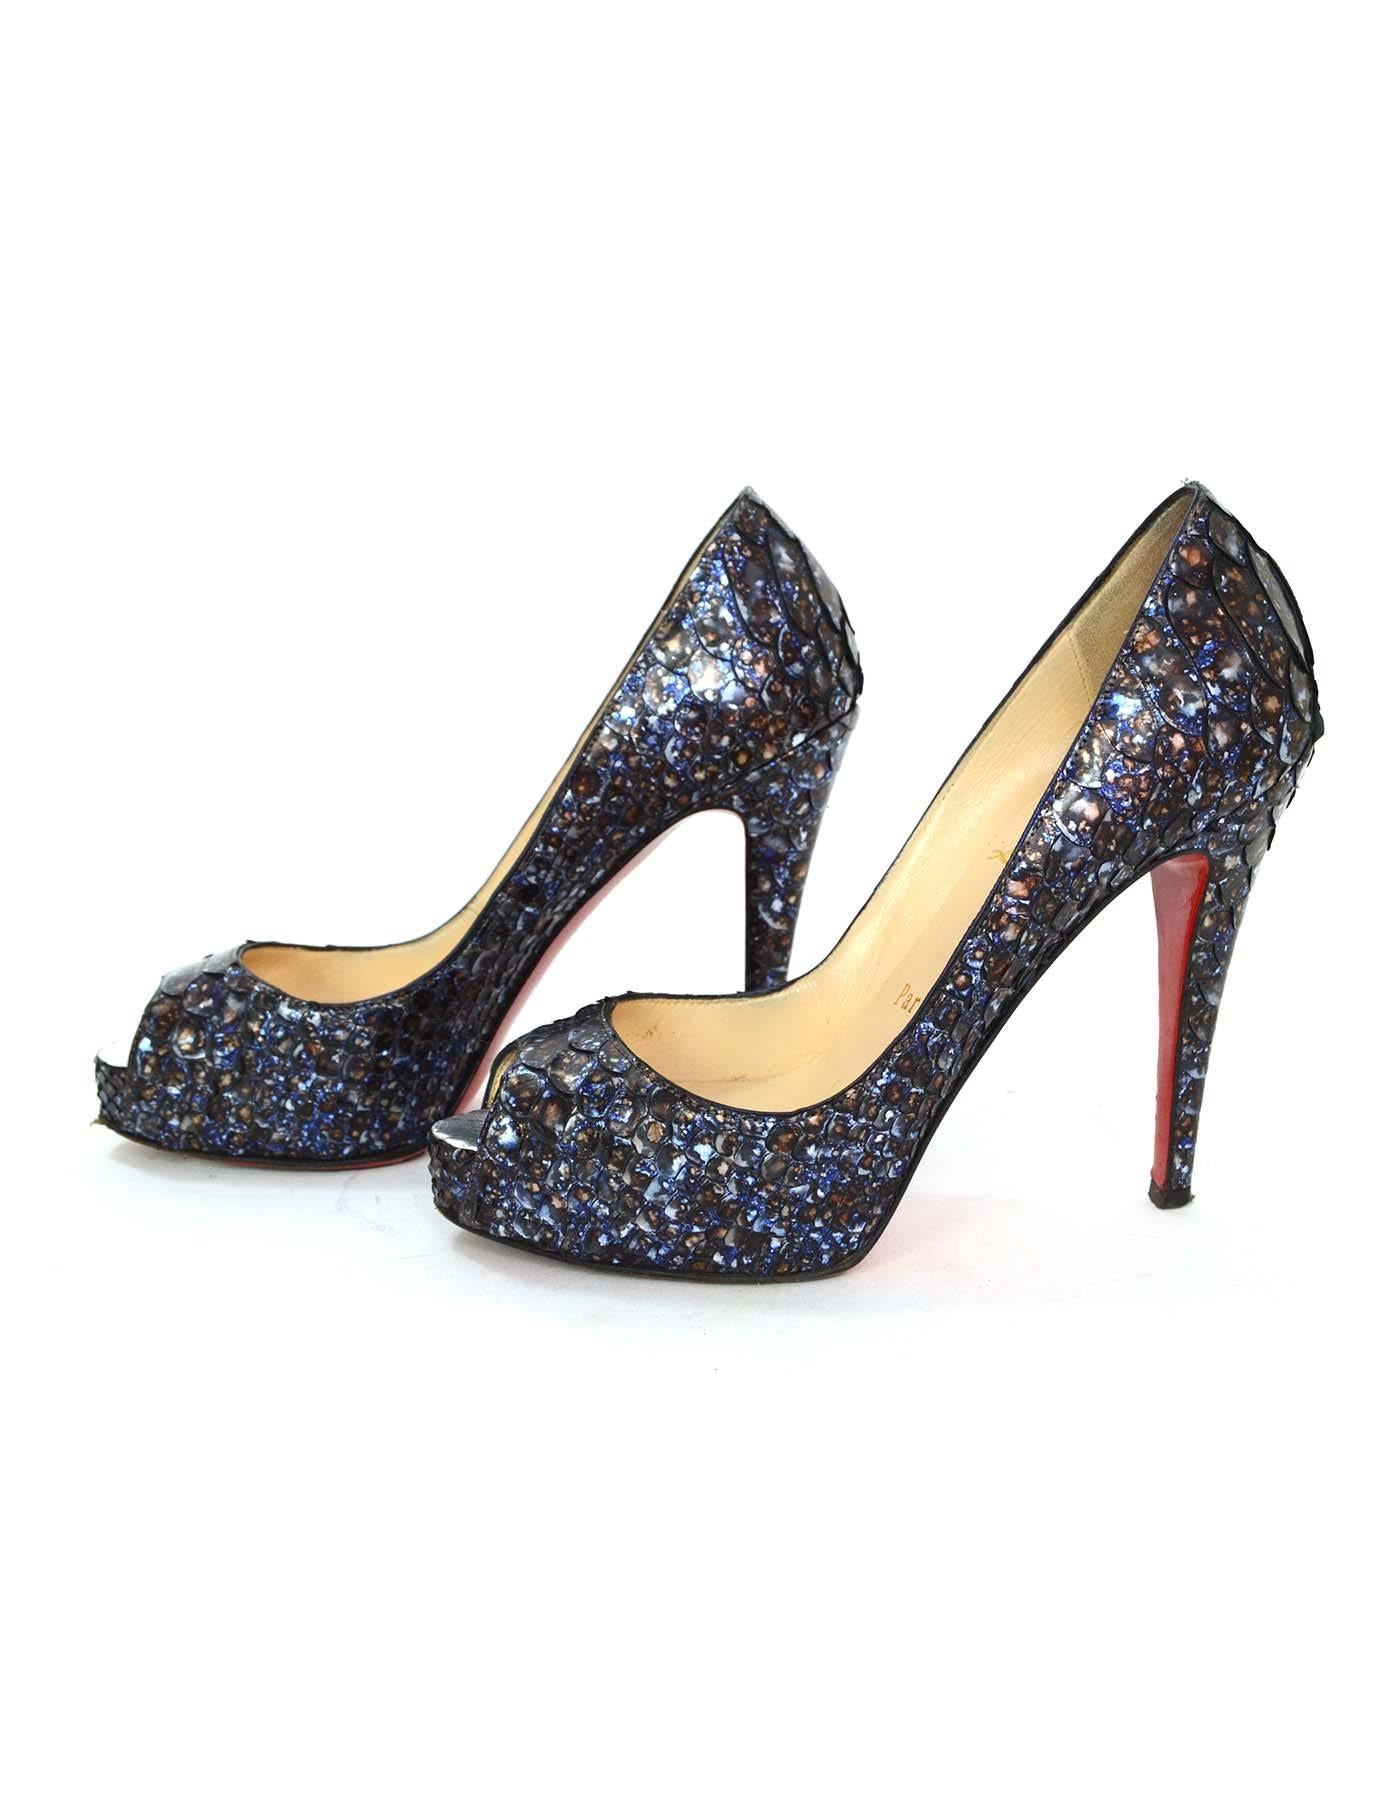 Christian Louboutin Metallic Blue Python 'Very Prive' Peep-Toe Pumps 
Features hidden platform
Made In: Italy
Color: Metallic blue with tones of brown and silver throughout
Materials: Python
Closure/Opening: Slide on
Sole Stamp: Christian